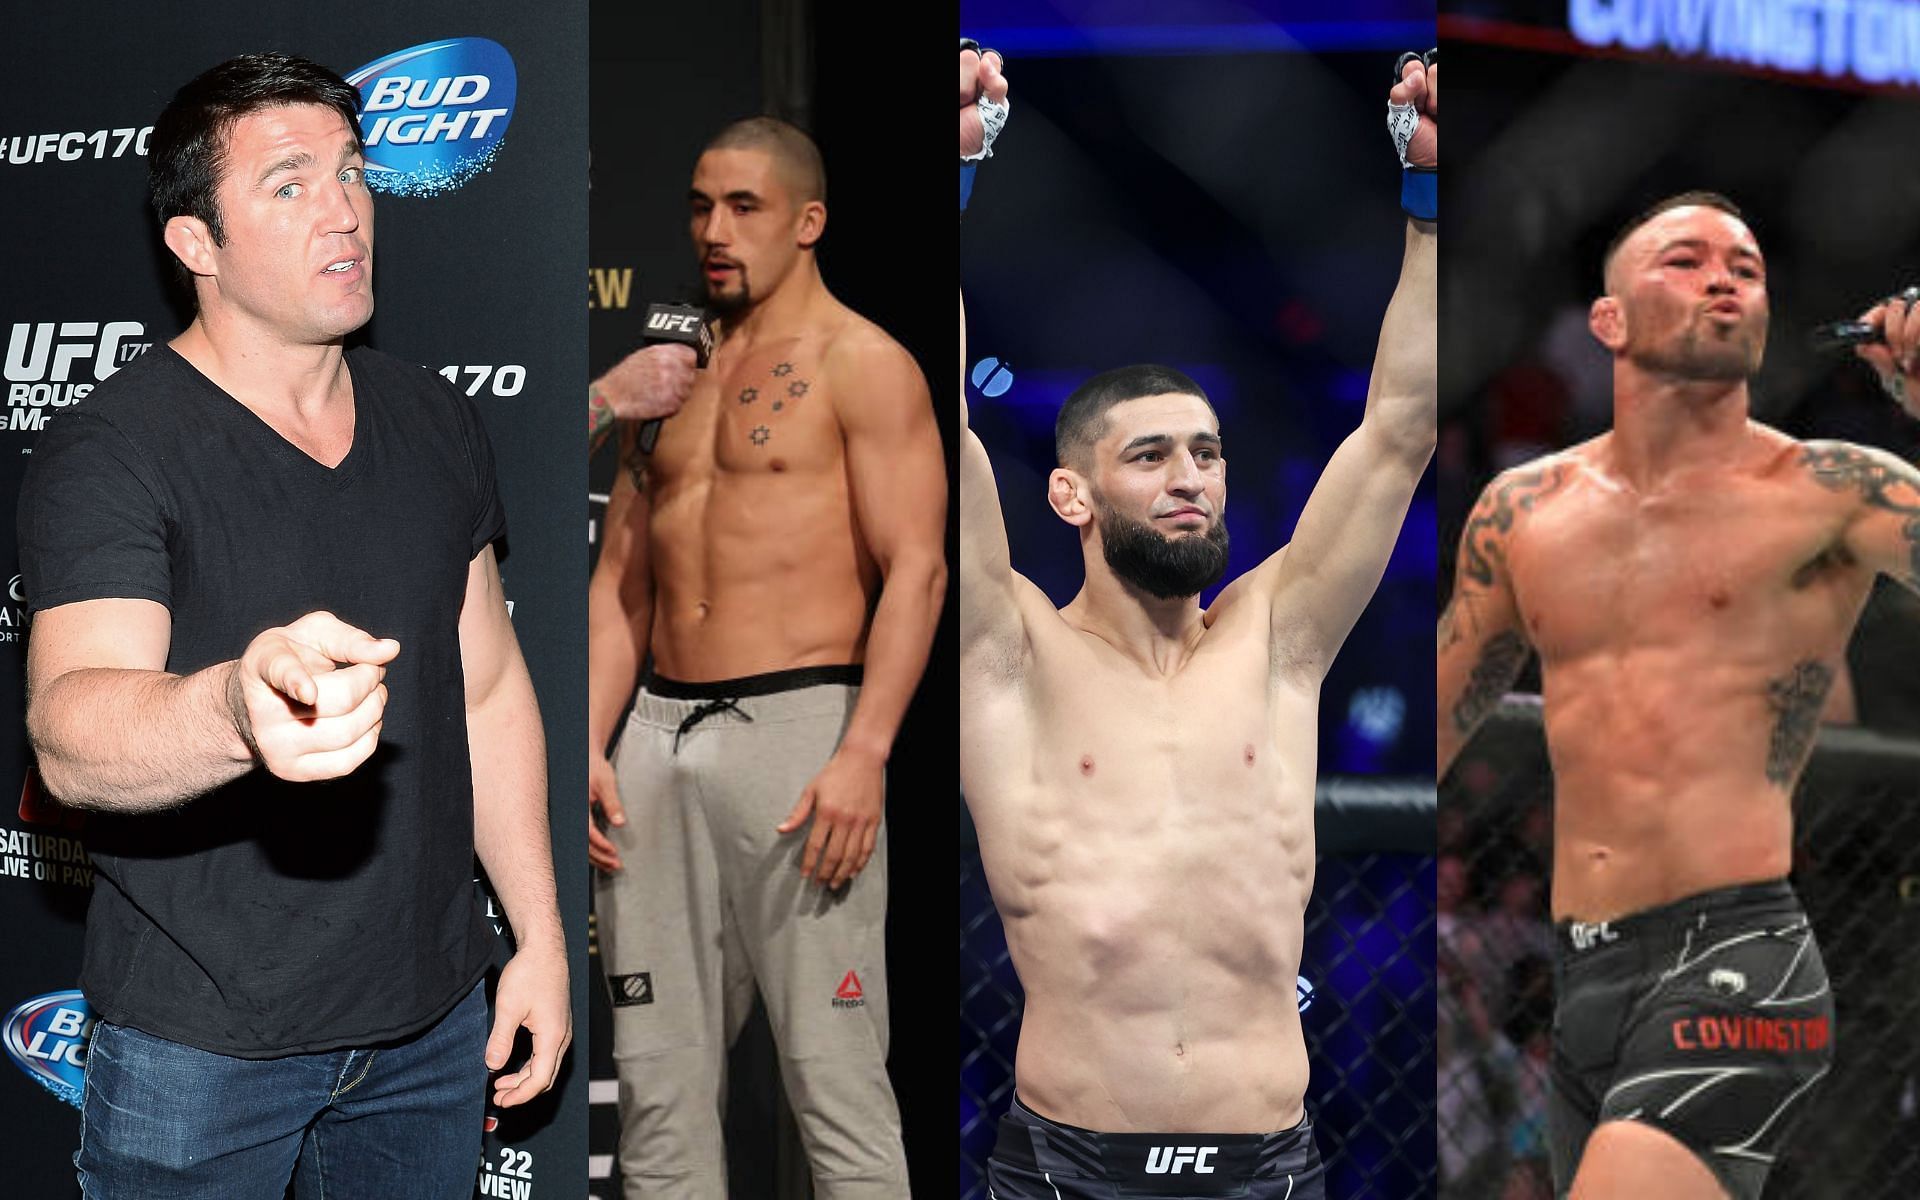 From left to right: Chael Sonnen, Robert Whittaker, Khamzat Chimaev, and Colby Covington